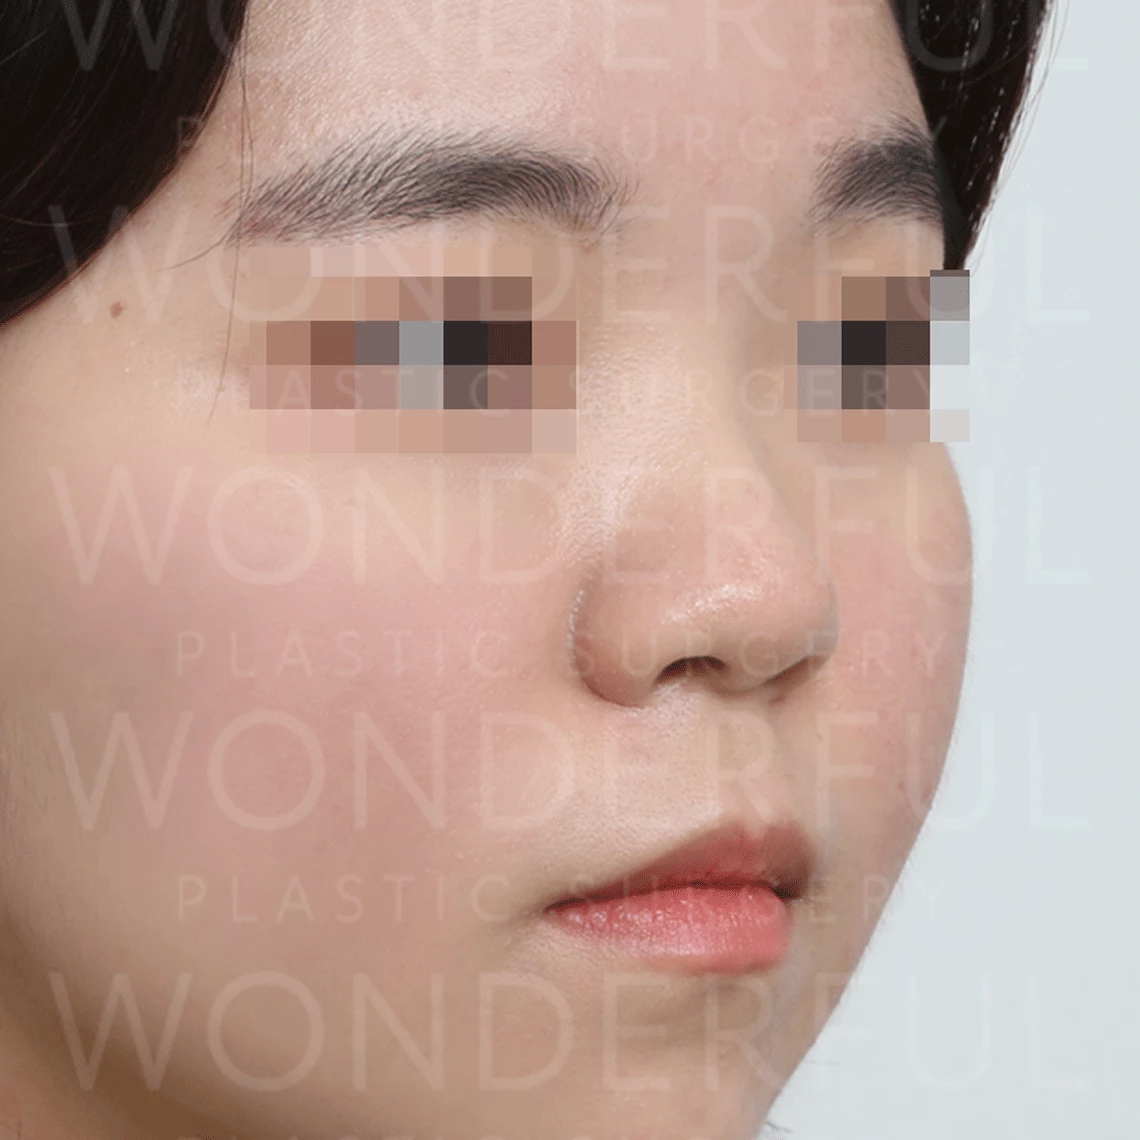 wonderful-plastic-surgery-hospital-korea-nose-rhinoplasty-before-after-results-before-2